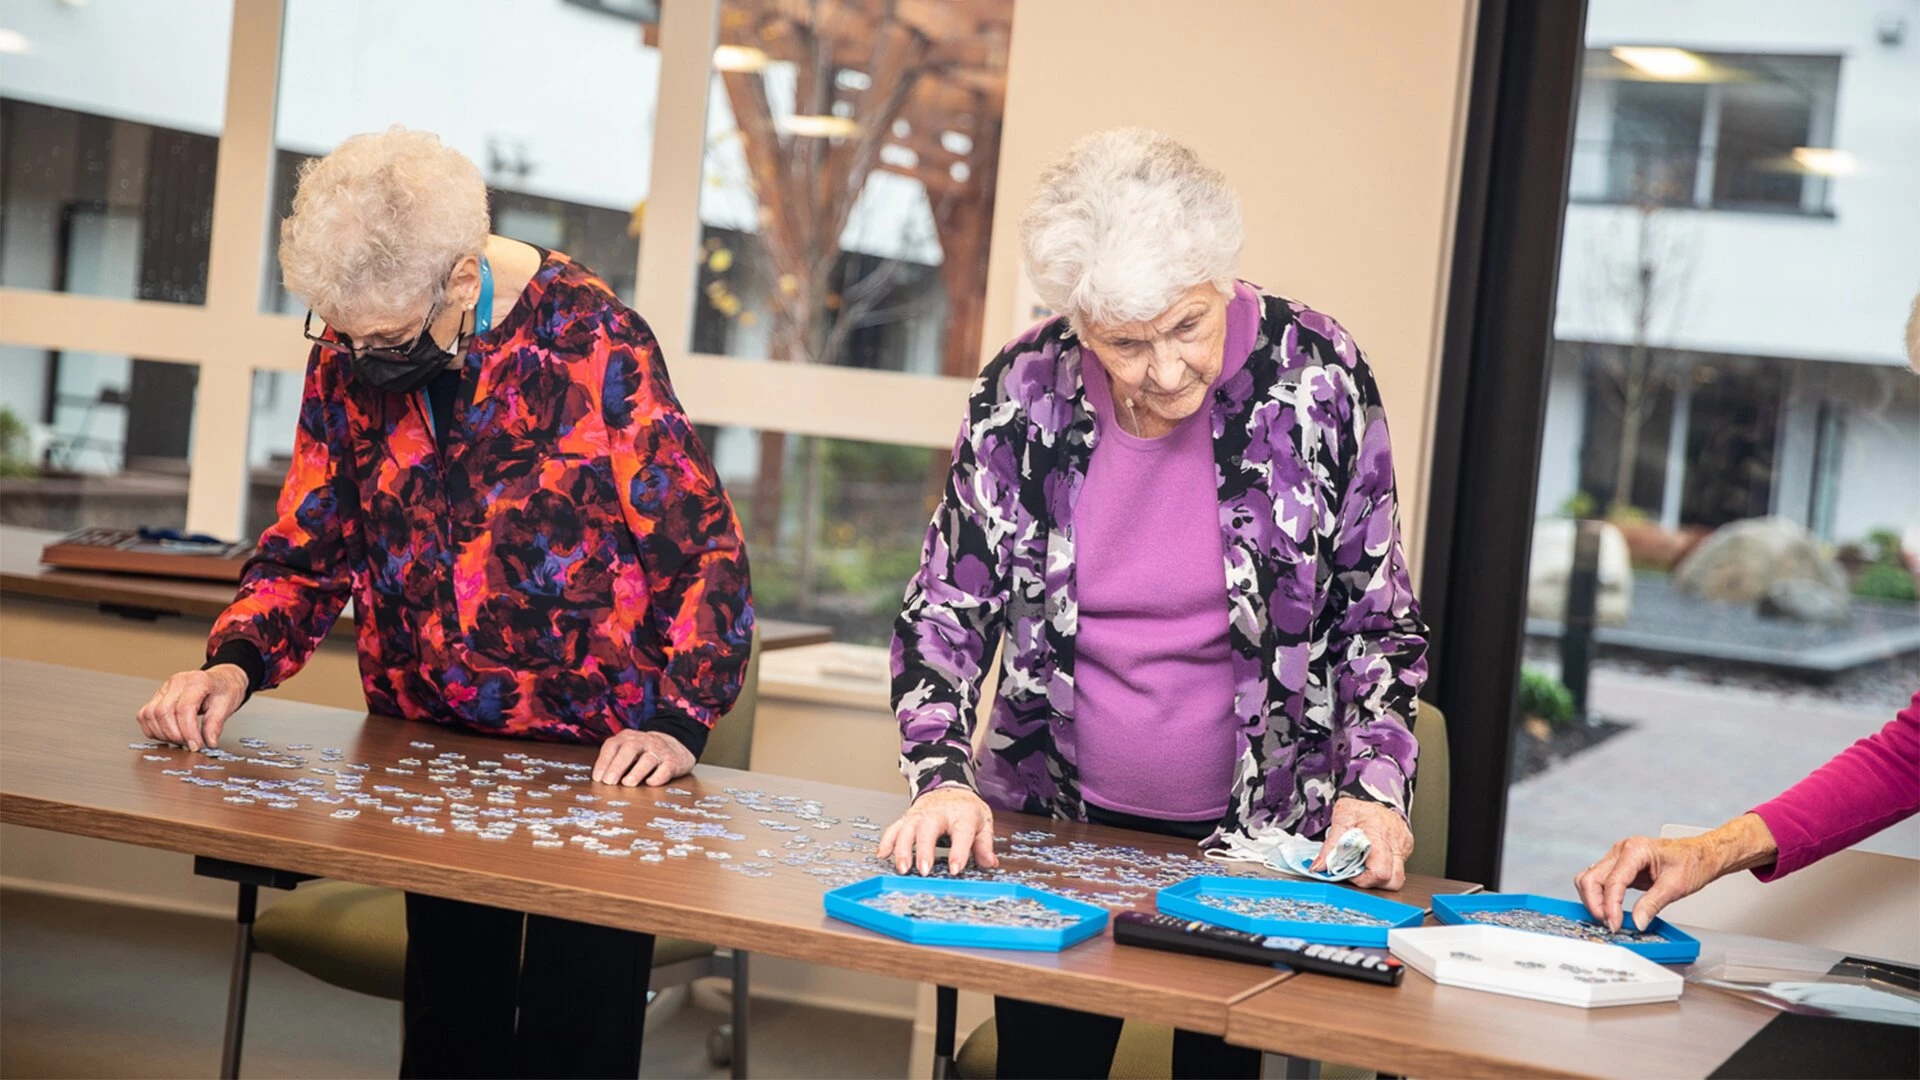 Elderly women putting together a puzzle in senior living